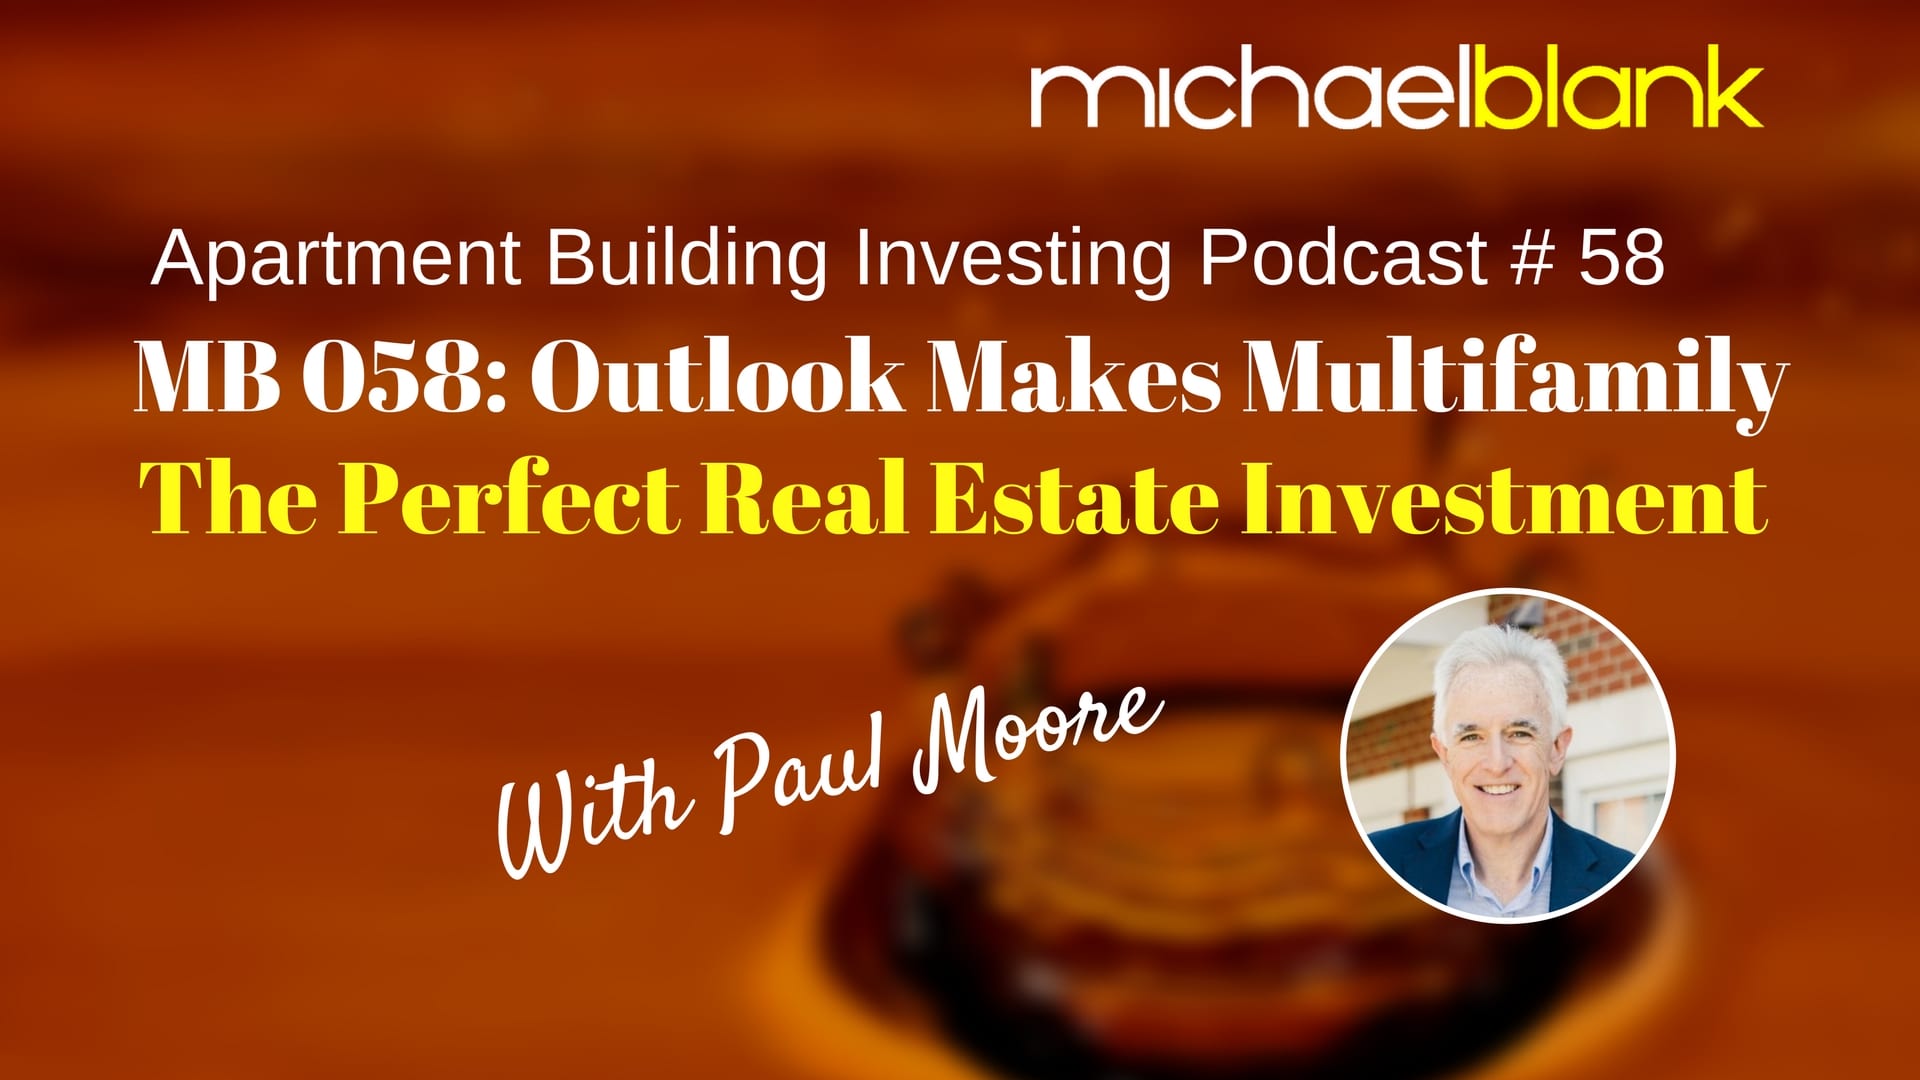 MB 058: Outlook Makes Multifamily the Perfect Real Estate Investment – With Paul Moore